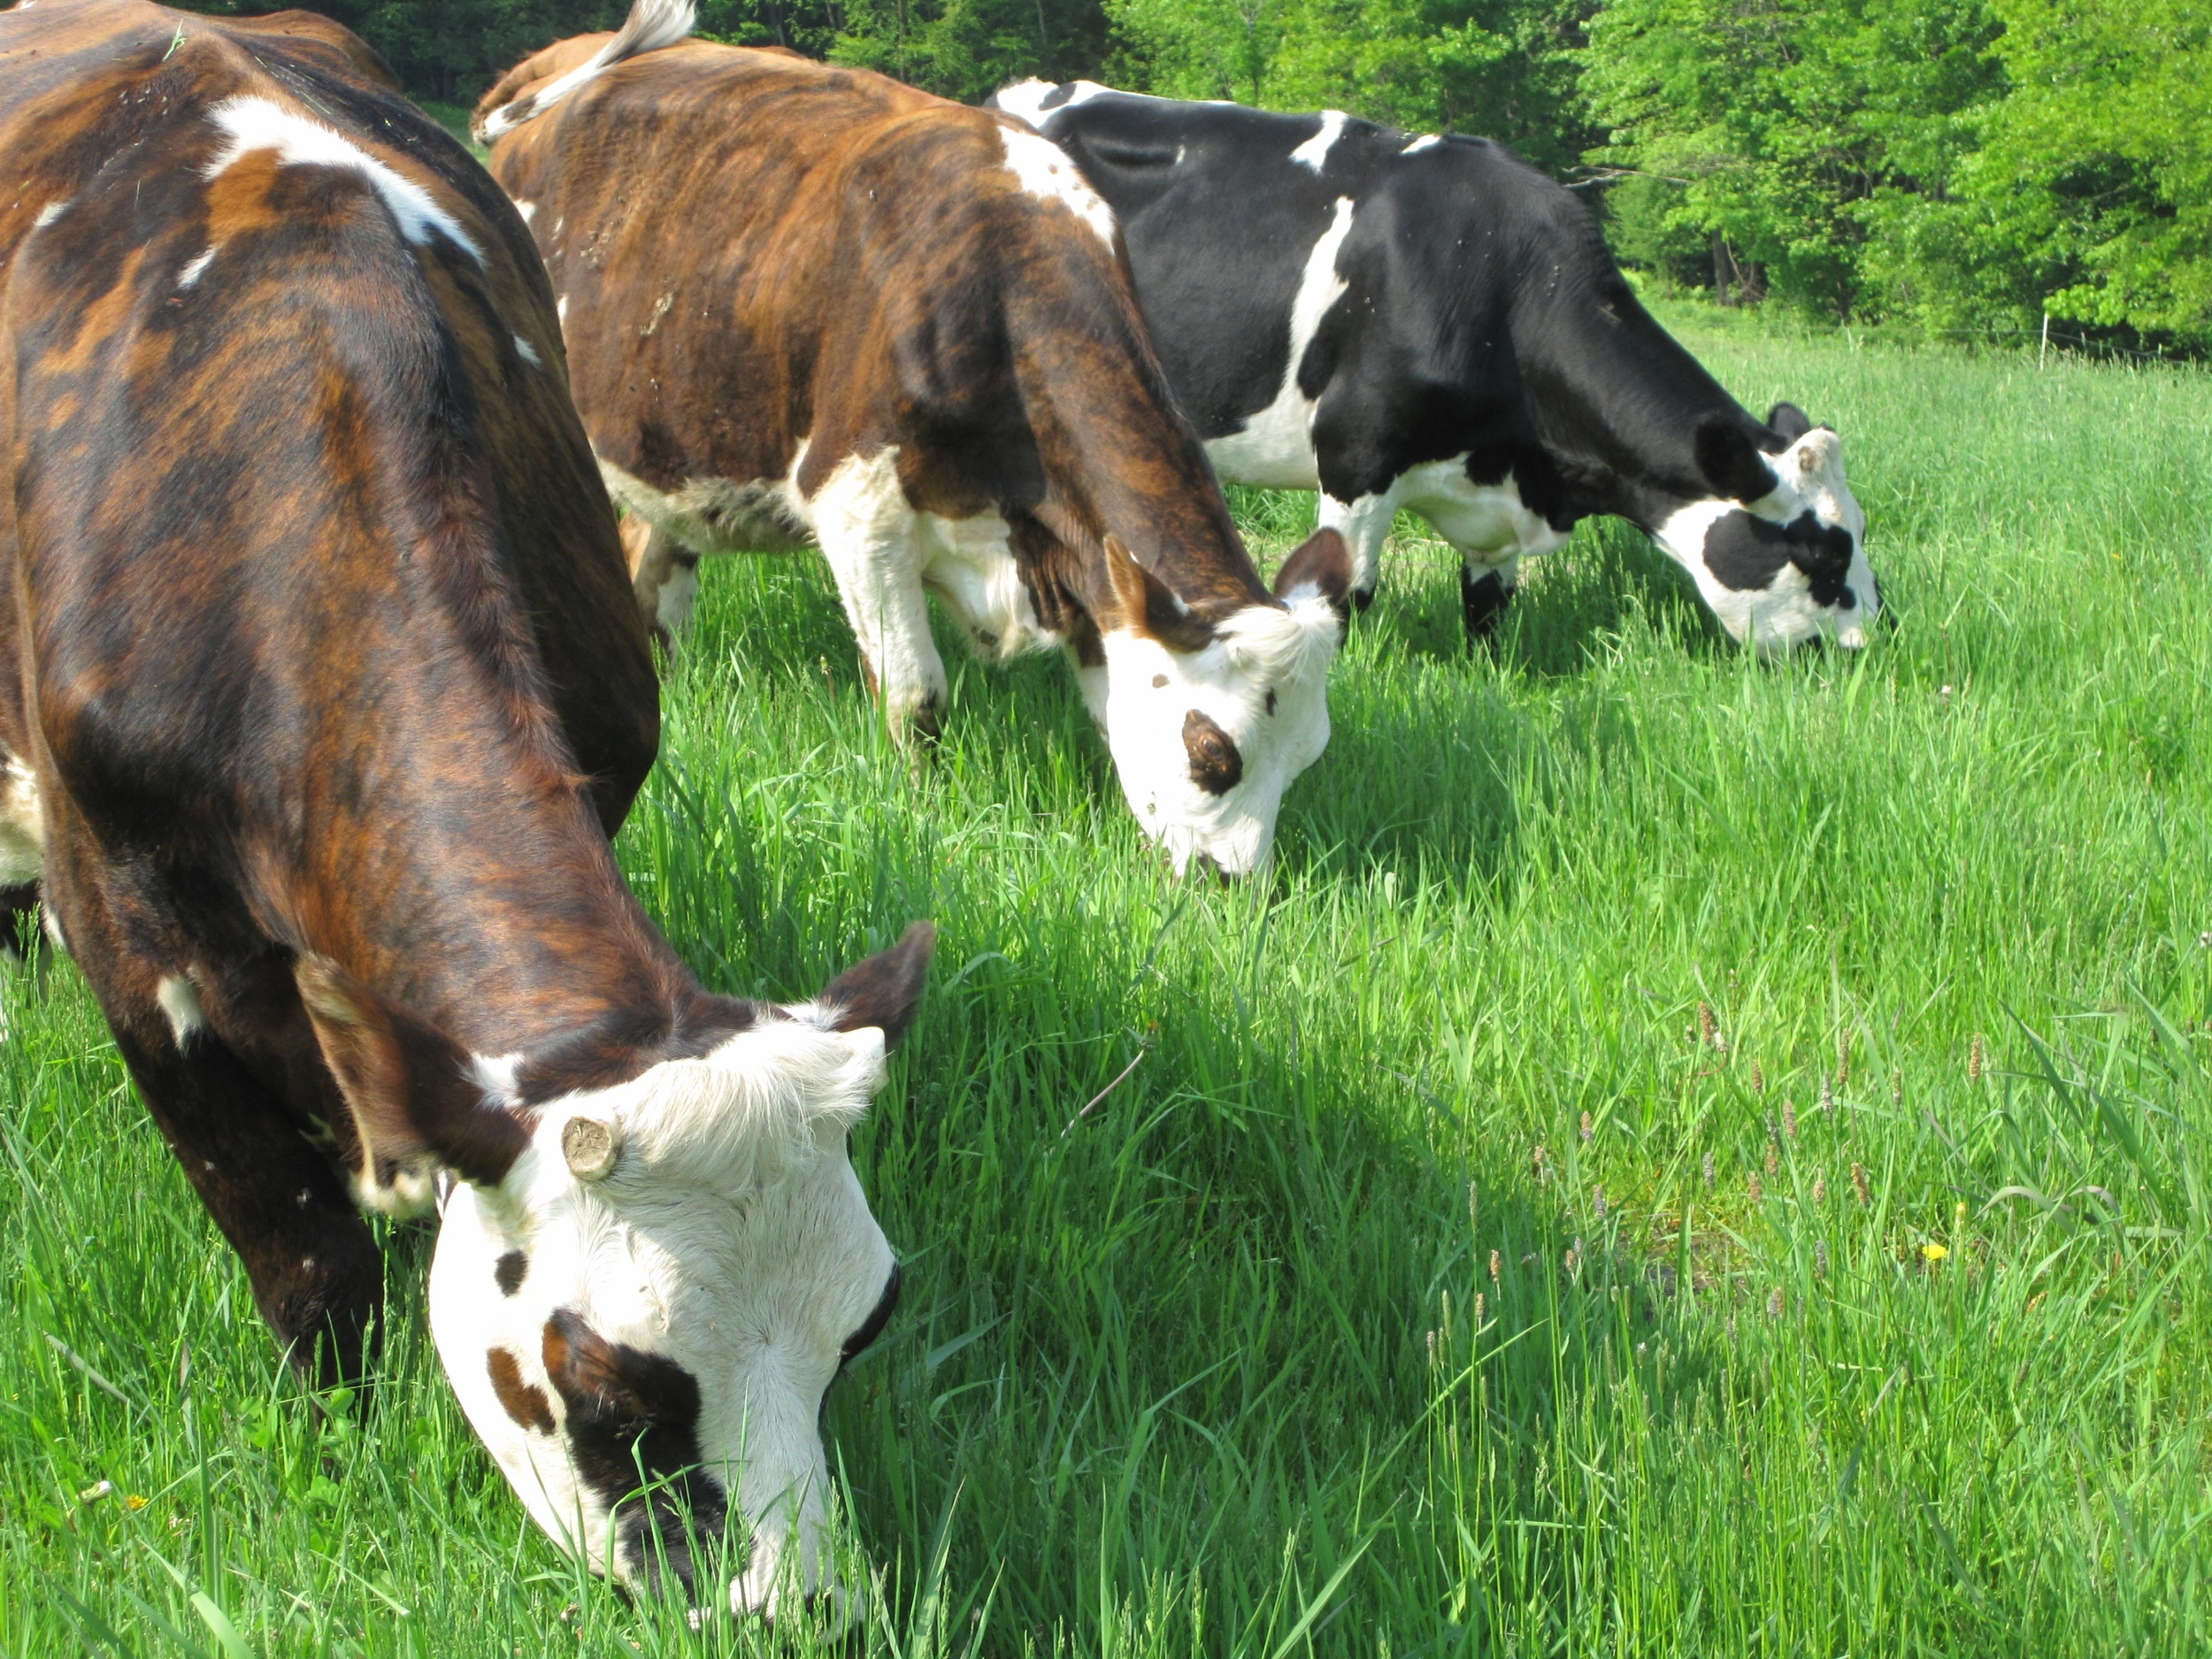   great dairy starts with&nbsp;gorgeous grass    